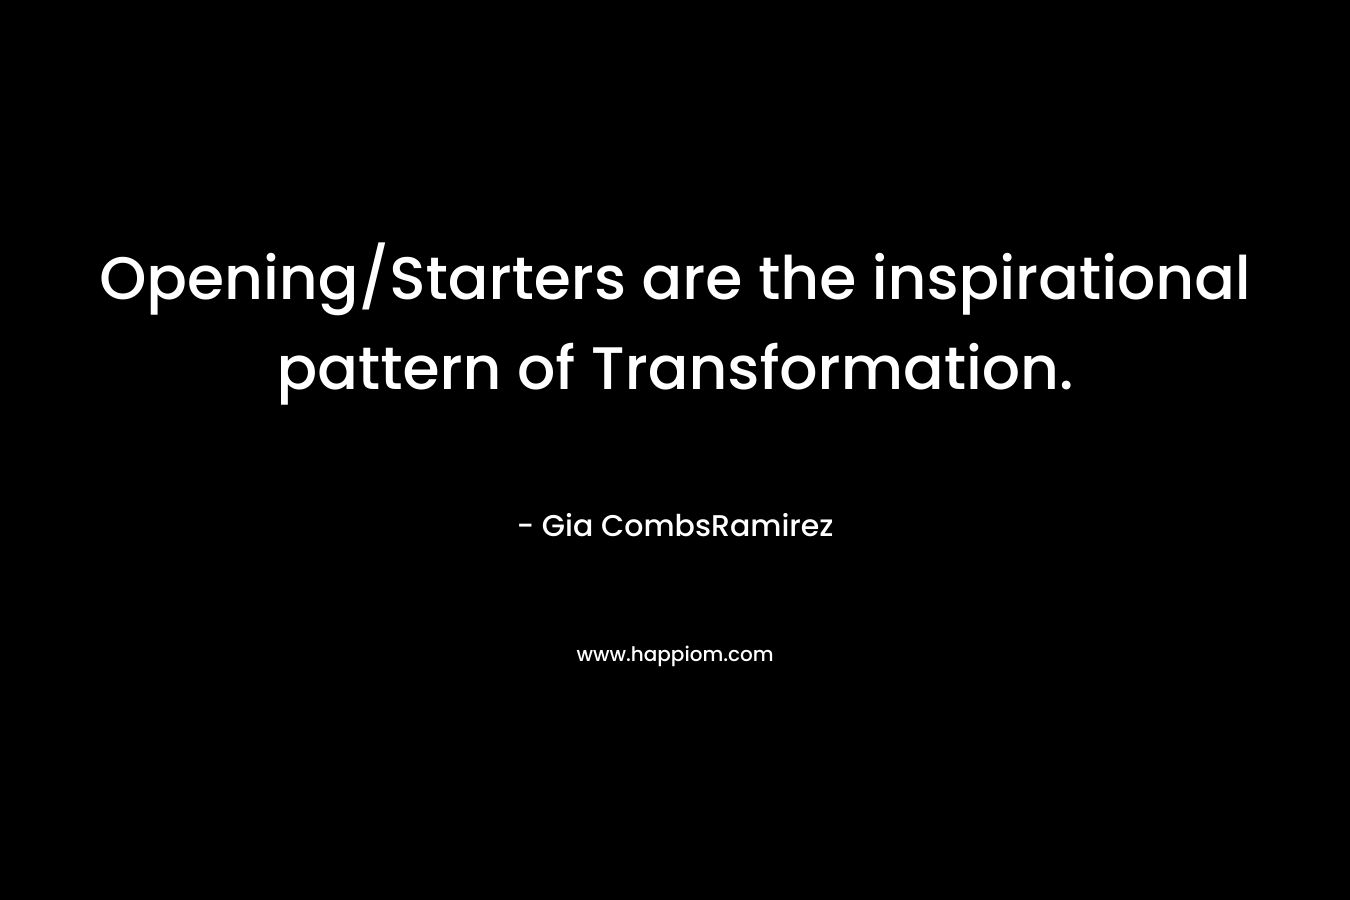 Opening/Starters are the inspirational pattern of Transformation. – Gia CombsRamirez